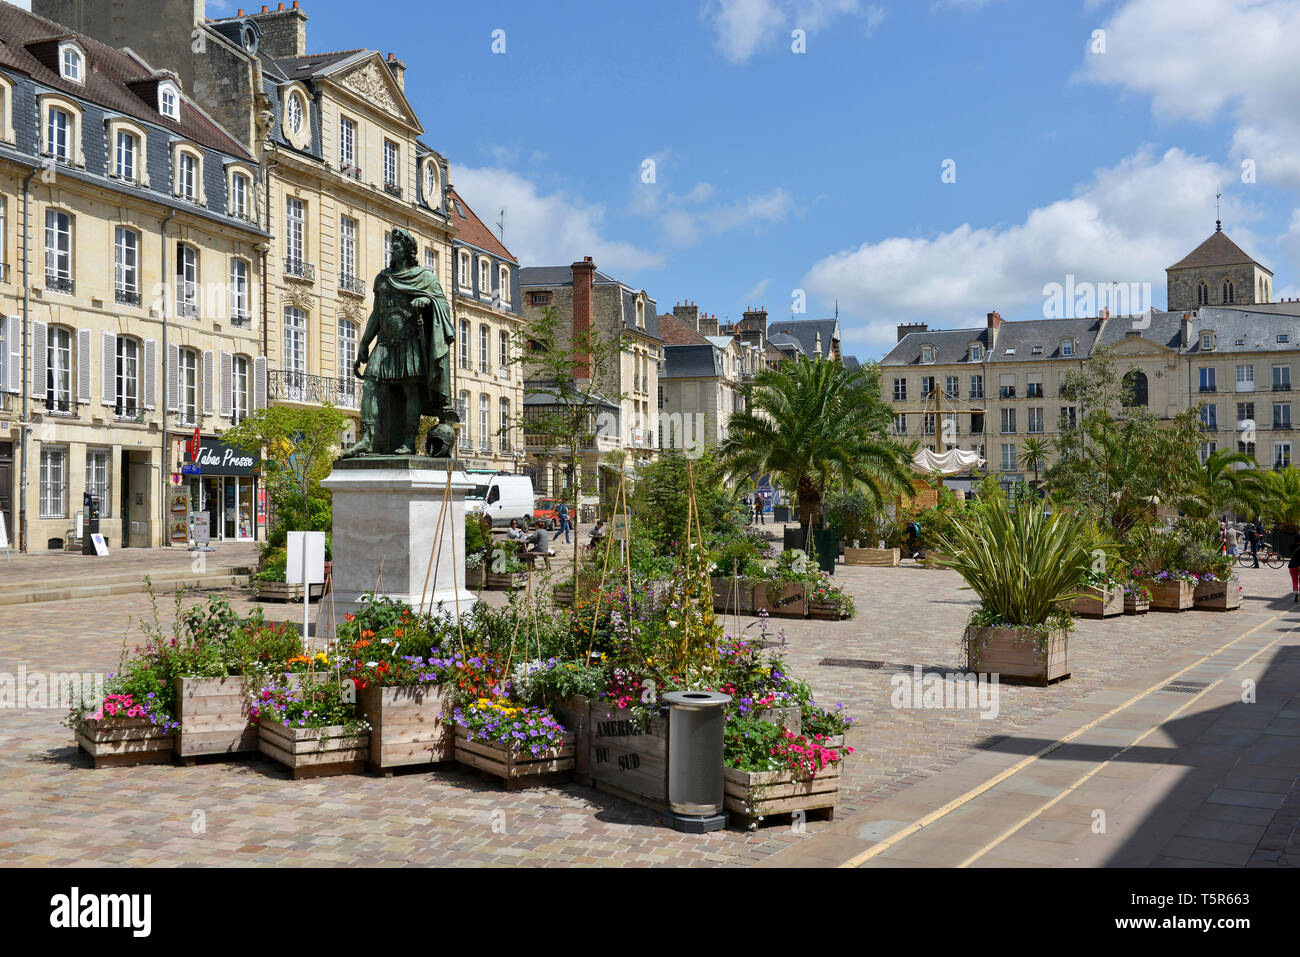 Caen (north-western France): 'place Saint- Sauveur' square in the city centre. On the left, statue of Louis XIV of France *** Local Caption *** Stock Photo